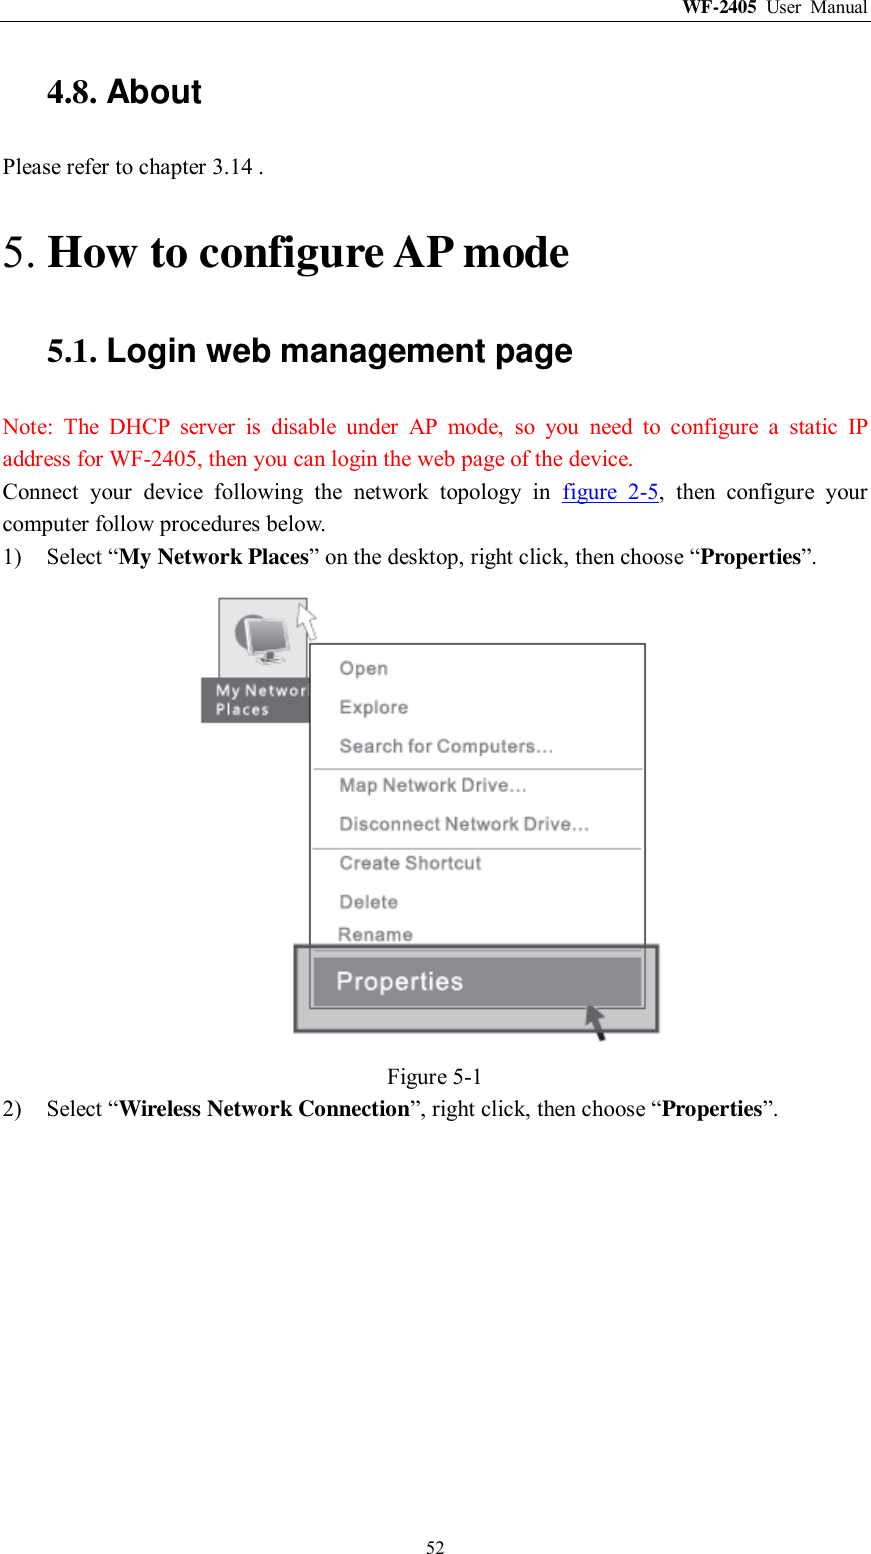 WF-2405  User  Manual  52 4.8. About Please refer to chapter 3.14 . 5. How to configure AP mode 5.1. Login web management page Note:  The  DHCP  server  is  disable  under  AP  mode,  so  you  need  to  configure  a  static  IP address for WF-2405, then you can login the web page of the device. Connect  your  device  following  the  network  topology  in  figure  2-5,  then  configure  your computer follow procedures below. 1) Select “My Network Places” on the desktop, right click, then choose “Properties”.  Figure 5-1 2) Select “Wireless Network Connection”, right click, then choose “Properties”. 